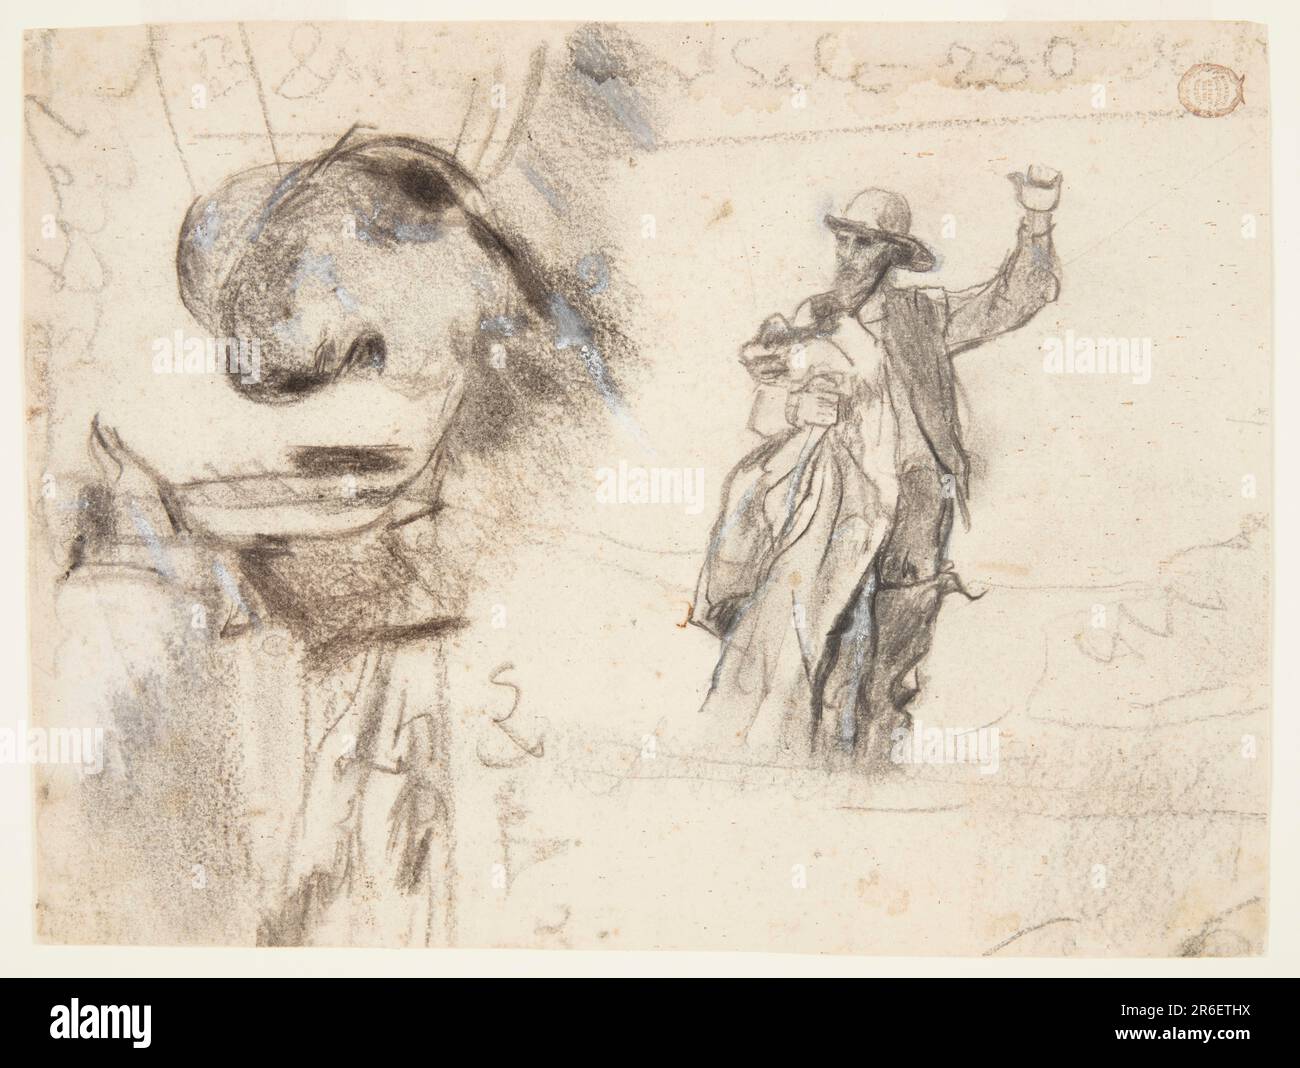 Sketch of the head and shoulders of sailor, wearing a wide-brimmed hat and holding a coat (a sou'wester), at right. Another sailor, nearly full-length, with left arm raised, is shown wearing rain hat and yelling. A sketch of clouds and sea appears at left. Various notations at the margins. Date: 1895-96. Charcoal, black chalk, white chalk on heavy cream wove paper. Museum: Cooper Hewitt, Smithsonian Design Museum. Stock Photo